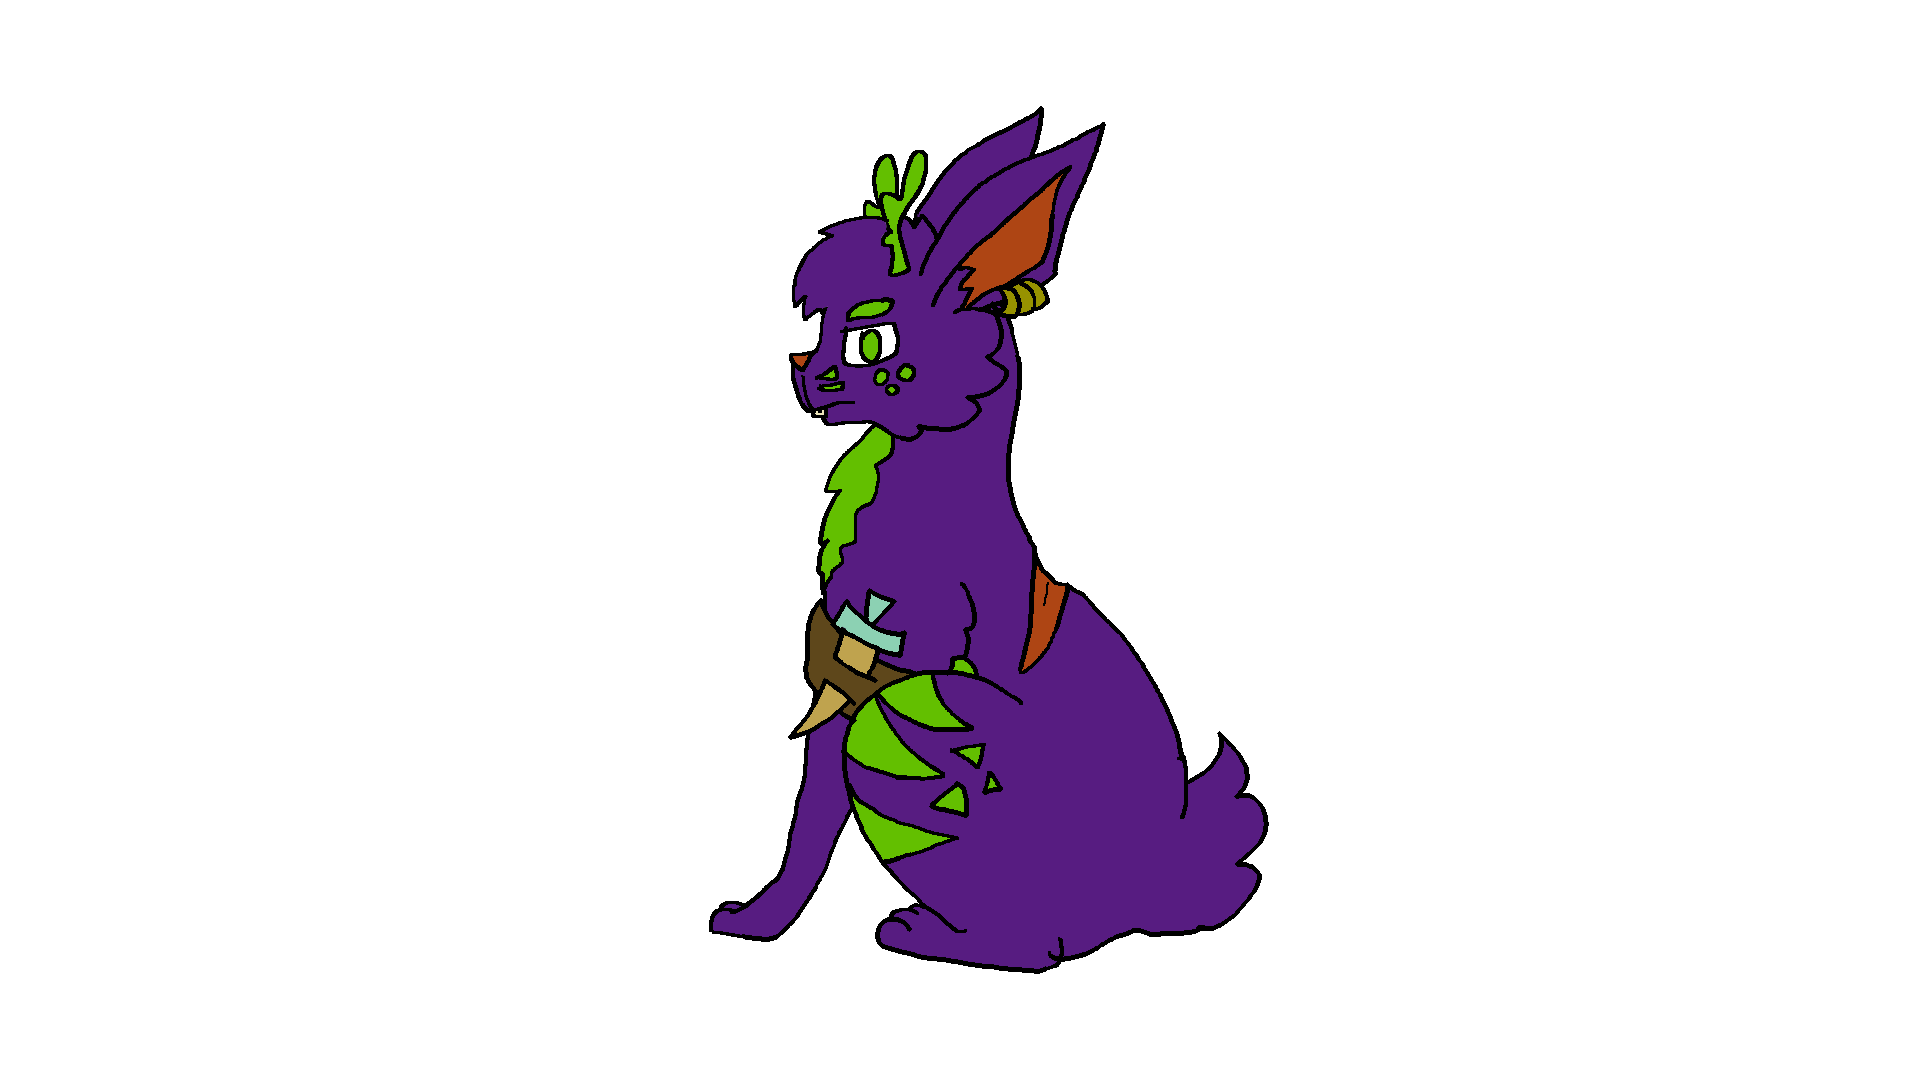 Purple jackalope with bright green antlers